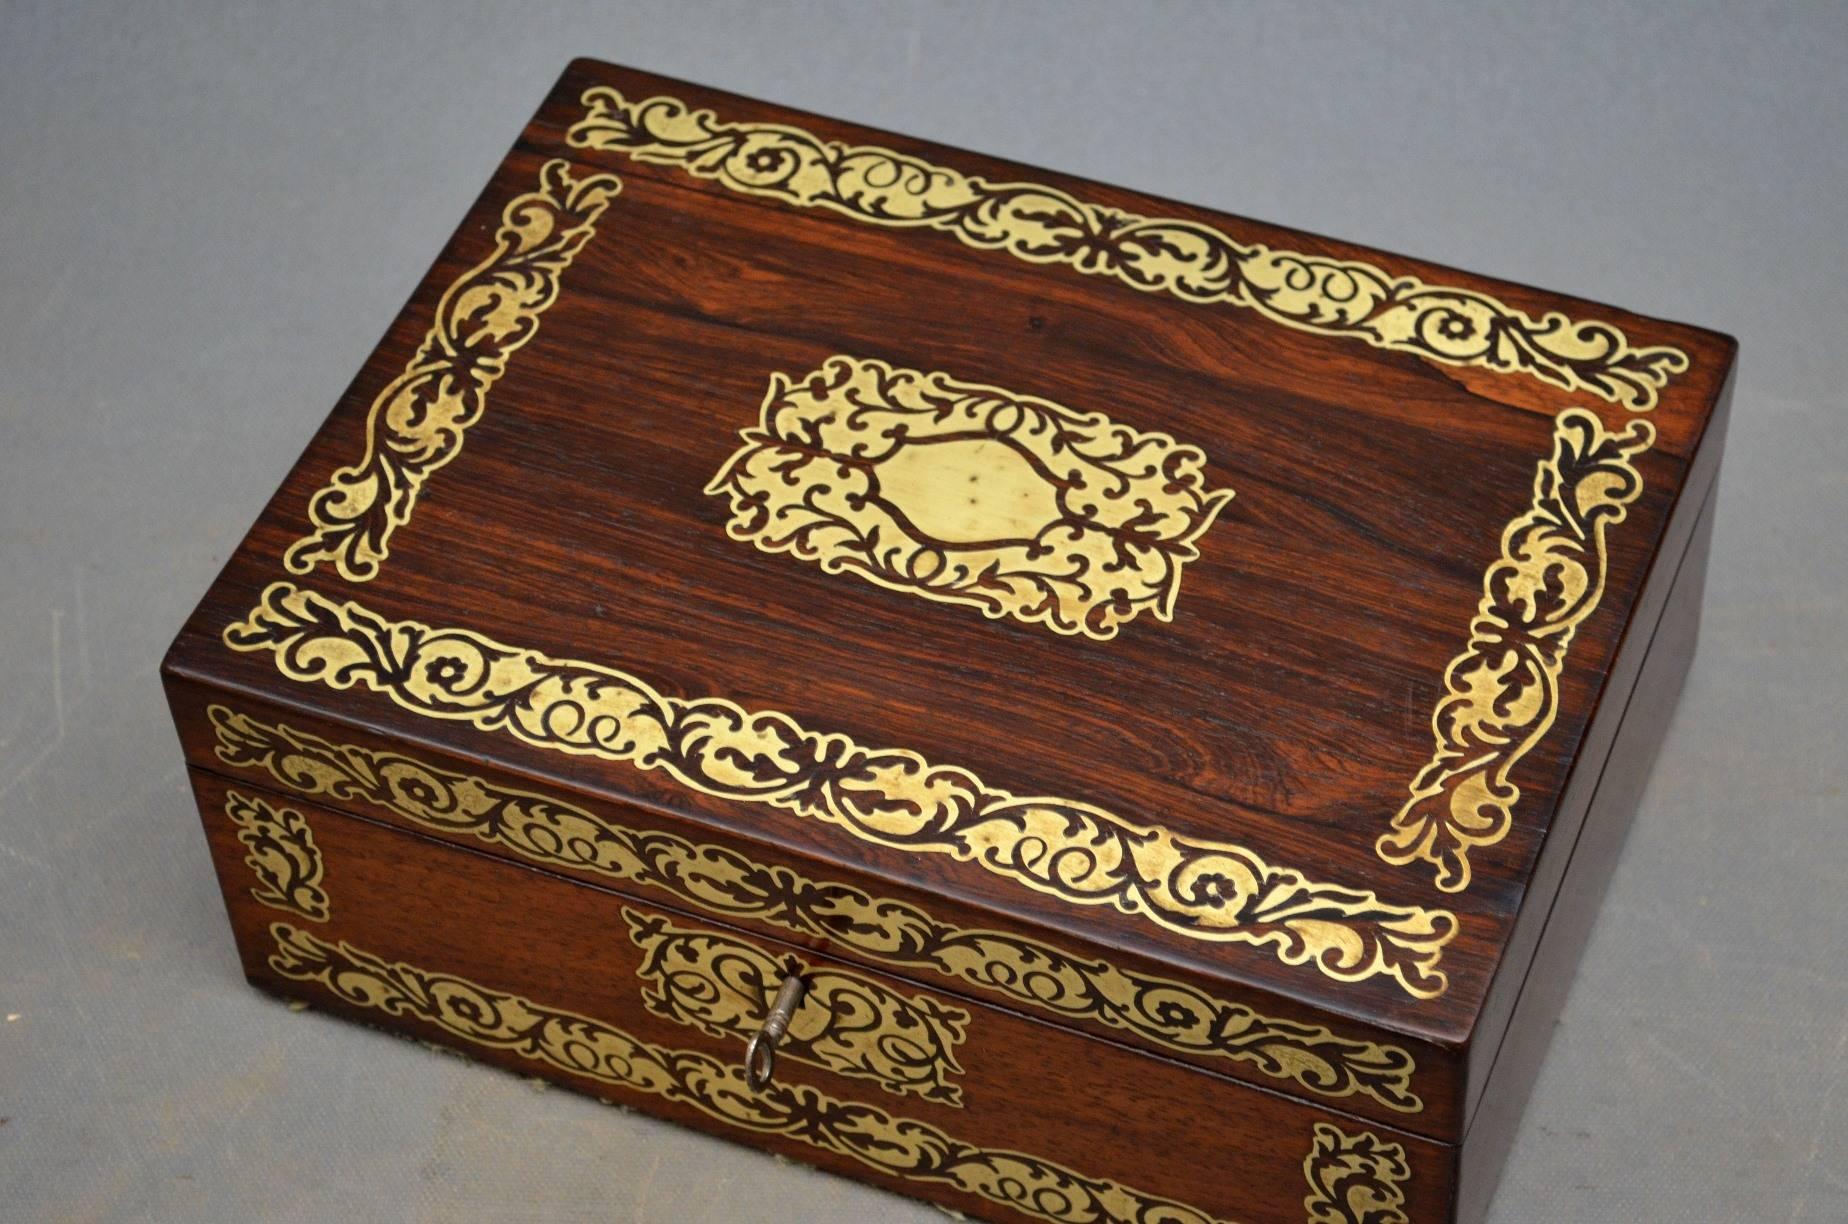 K0192. A stunning Regency rosewood jewelry box/sewing box, having brass decorated front and hinged top which opens to reveal immaculate blue interior with lift up tray, all fitted with original working lock an key. This is a truly exceptional box in